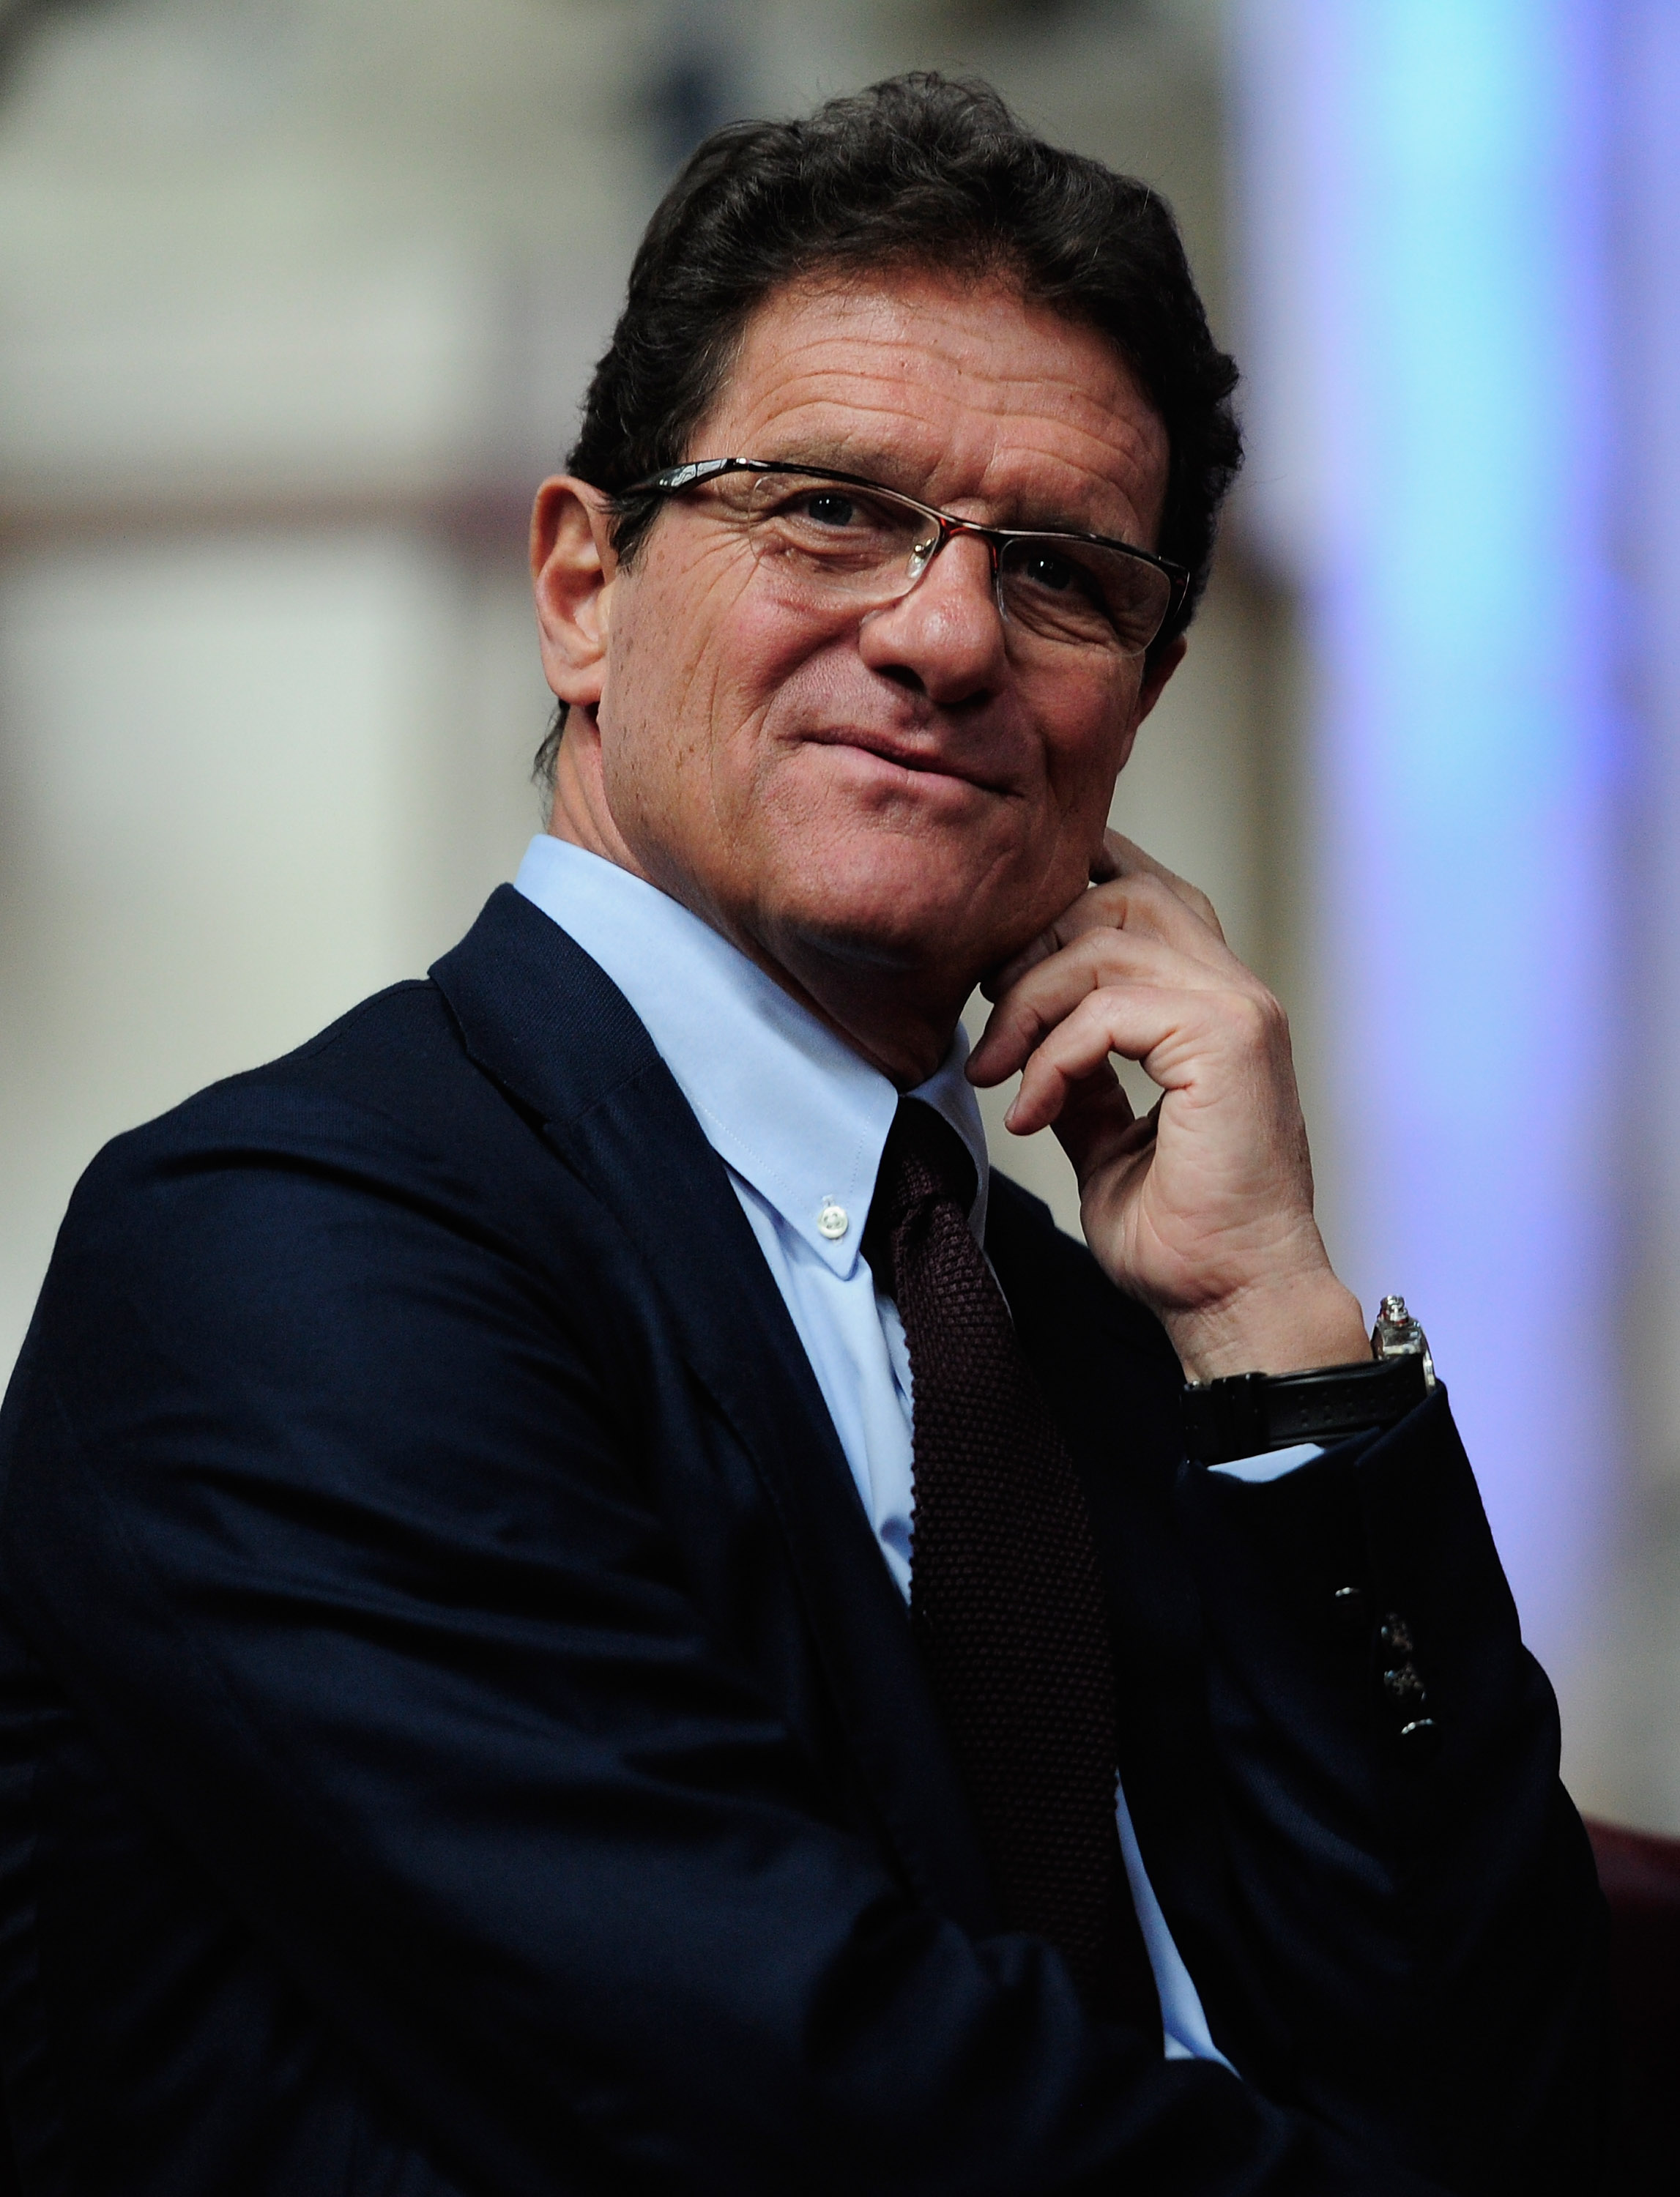 LONDON, ENGLAND - APRIL 20:  England Manager Fabio Capello attends the hand over of the UEFA Champions League Trophy at the Guildhall on April 20, 2011 in London, England.  (Photo by Jamie McDonald/Getty Images)